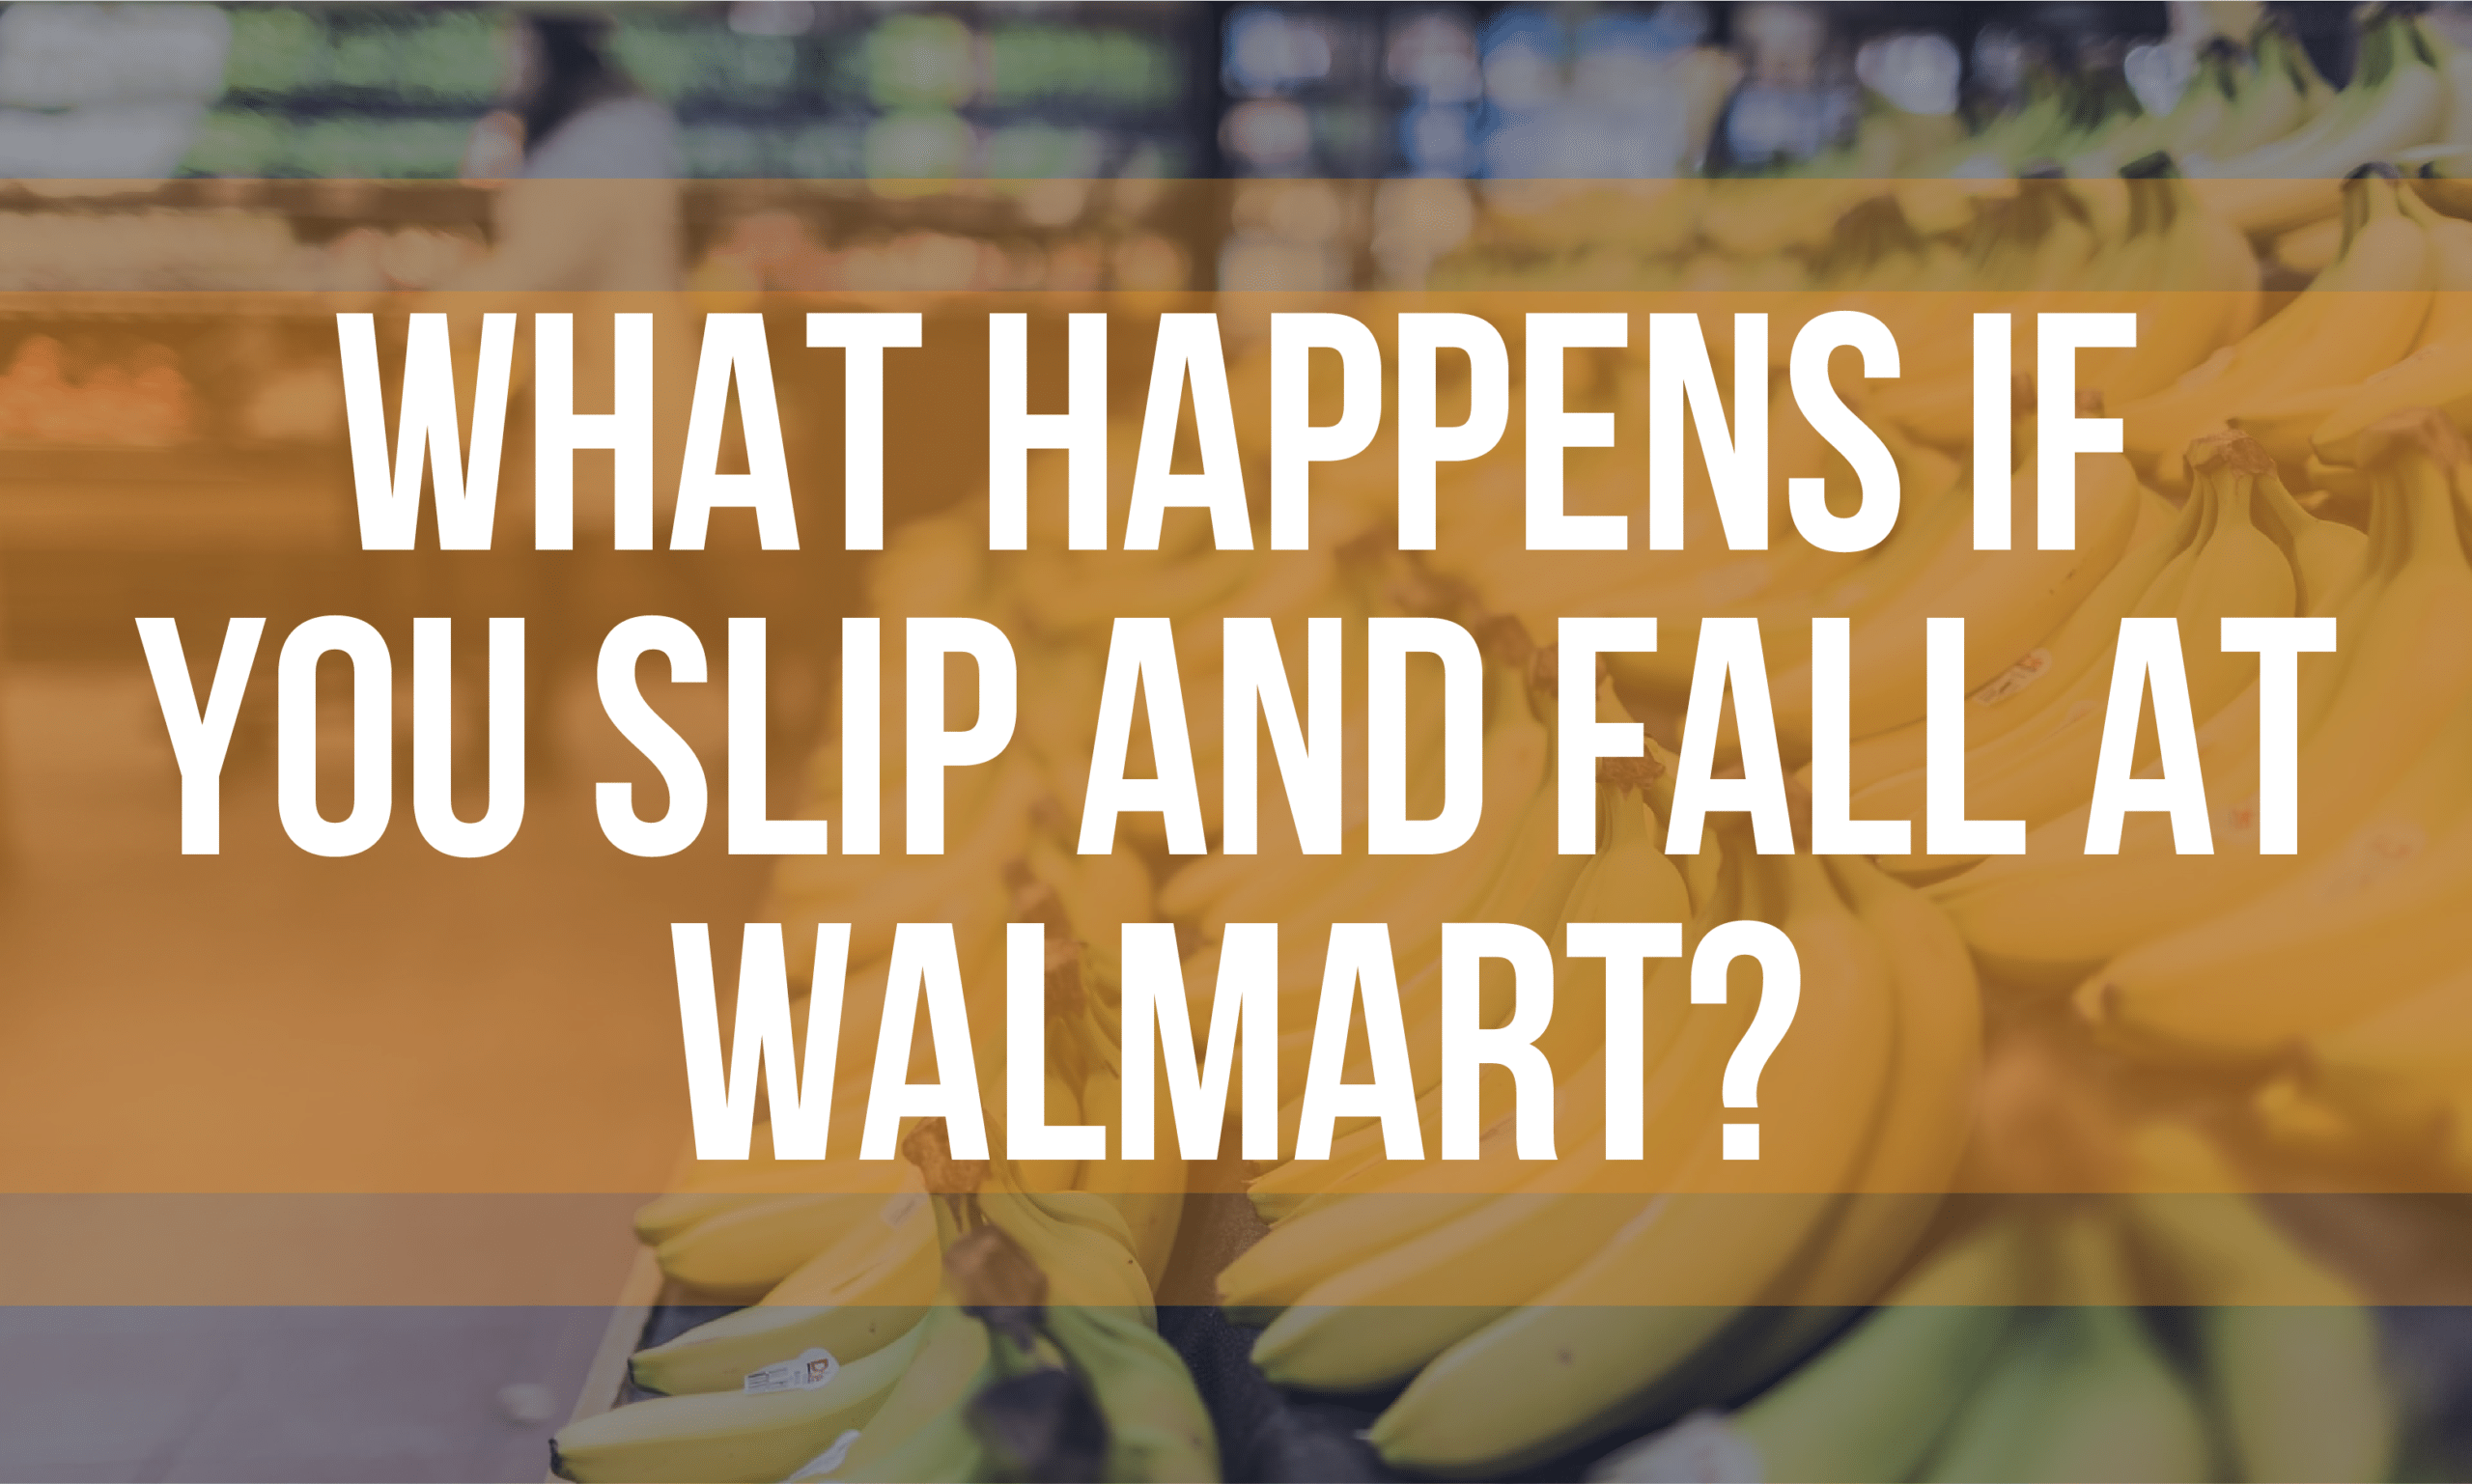 What Happens If You Slip and Fall at Walmart? Hipskind & McAninch, LLC